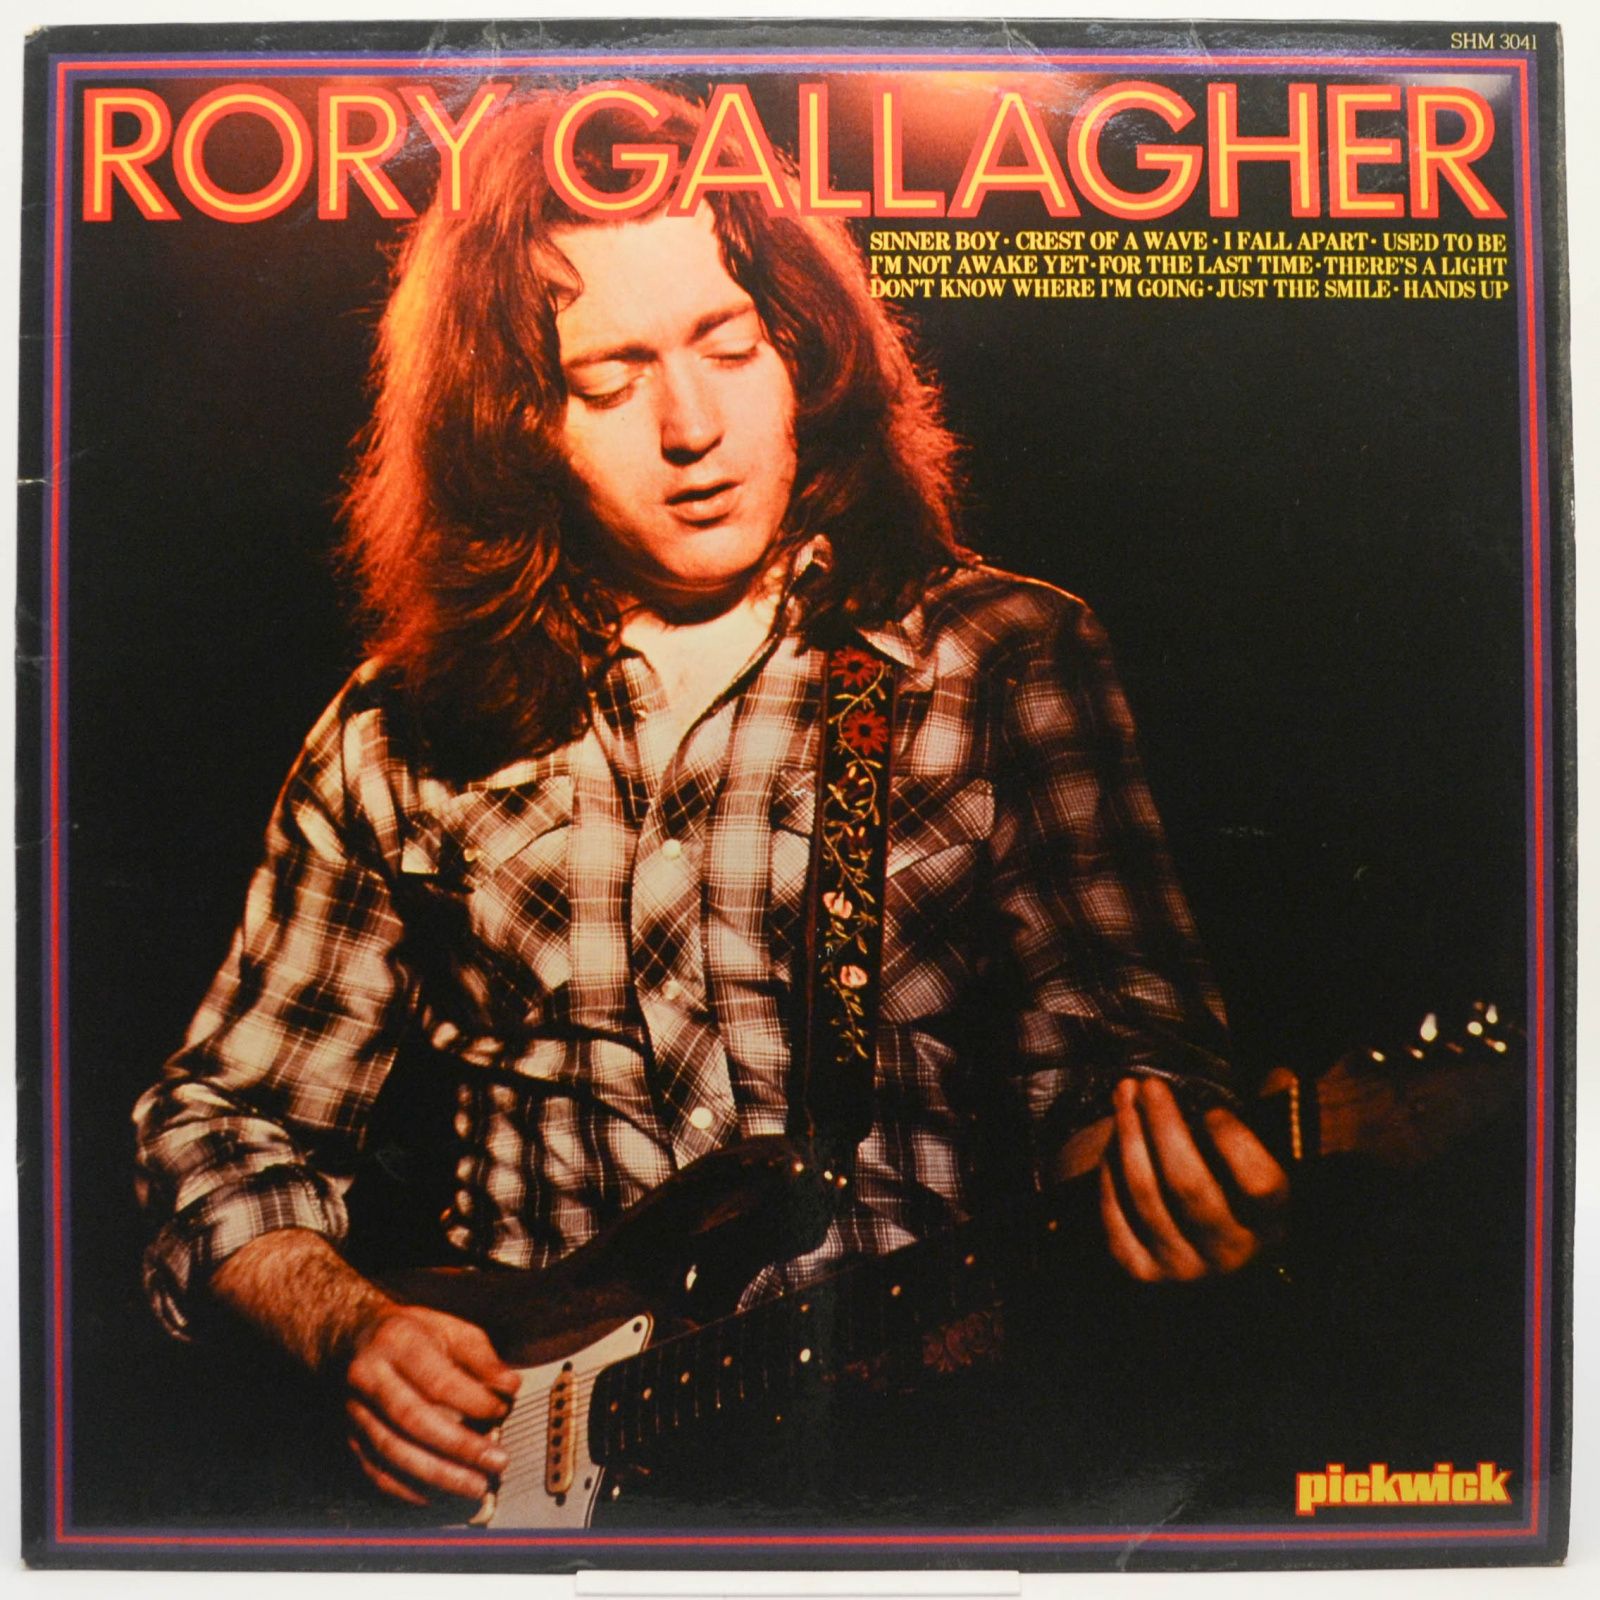 Rory Gallagher (UK), 1980